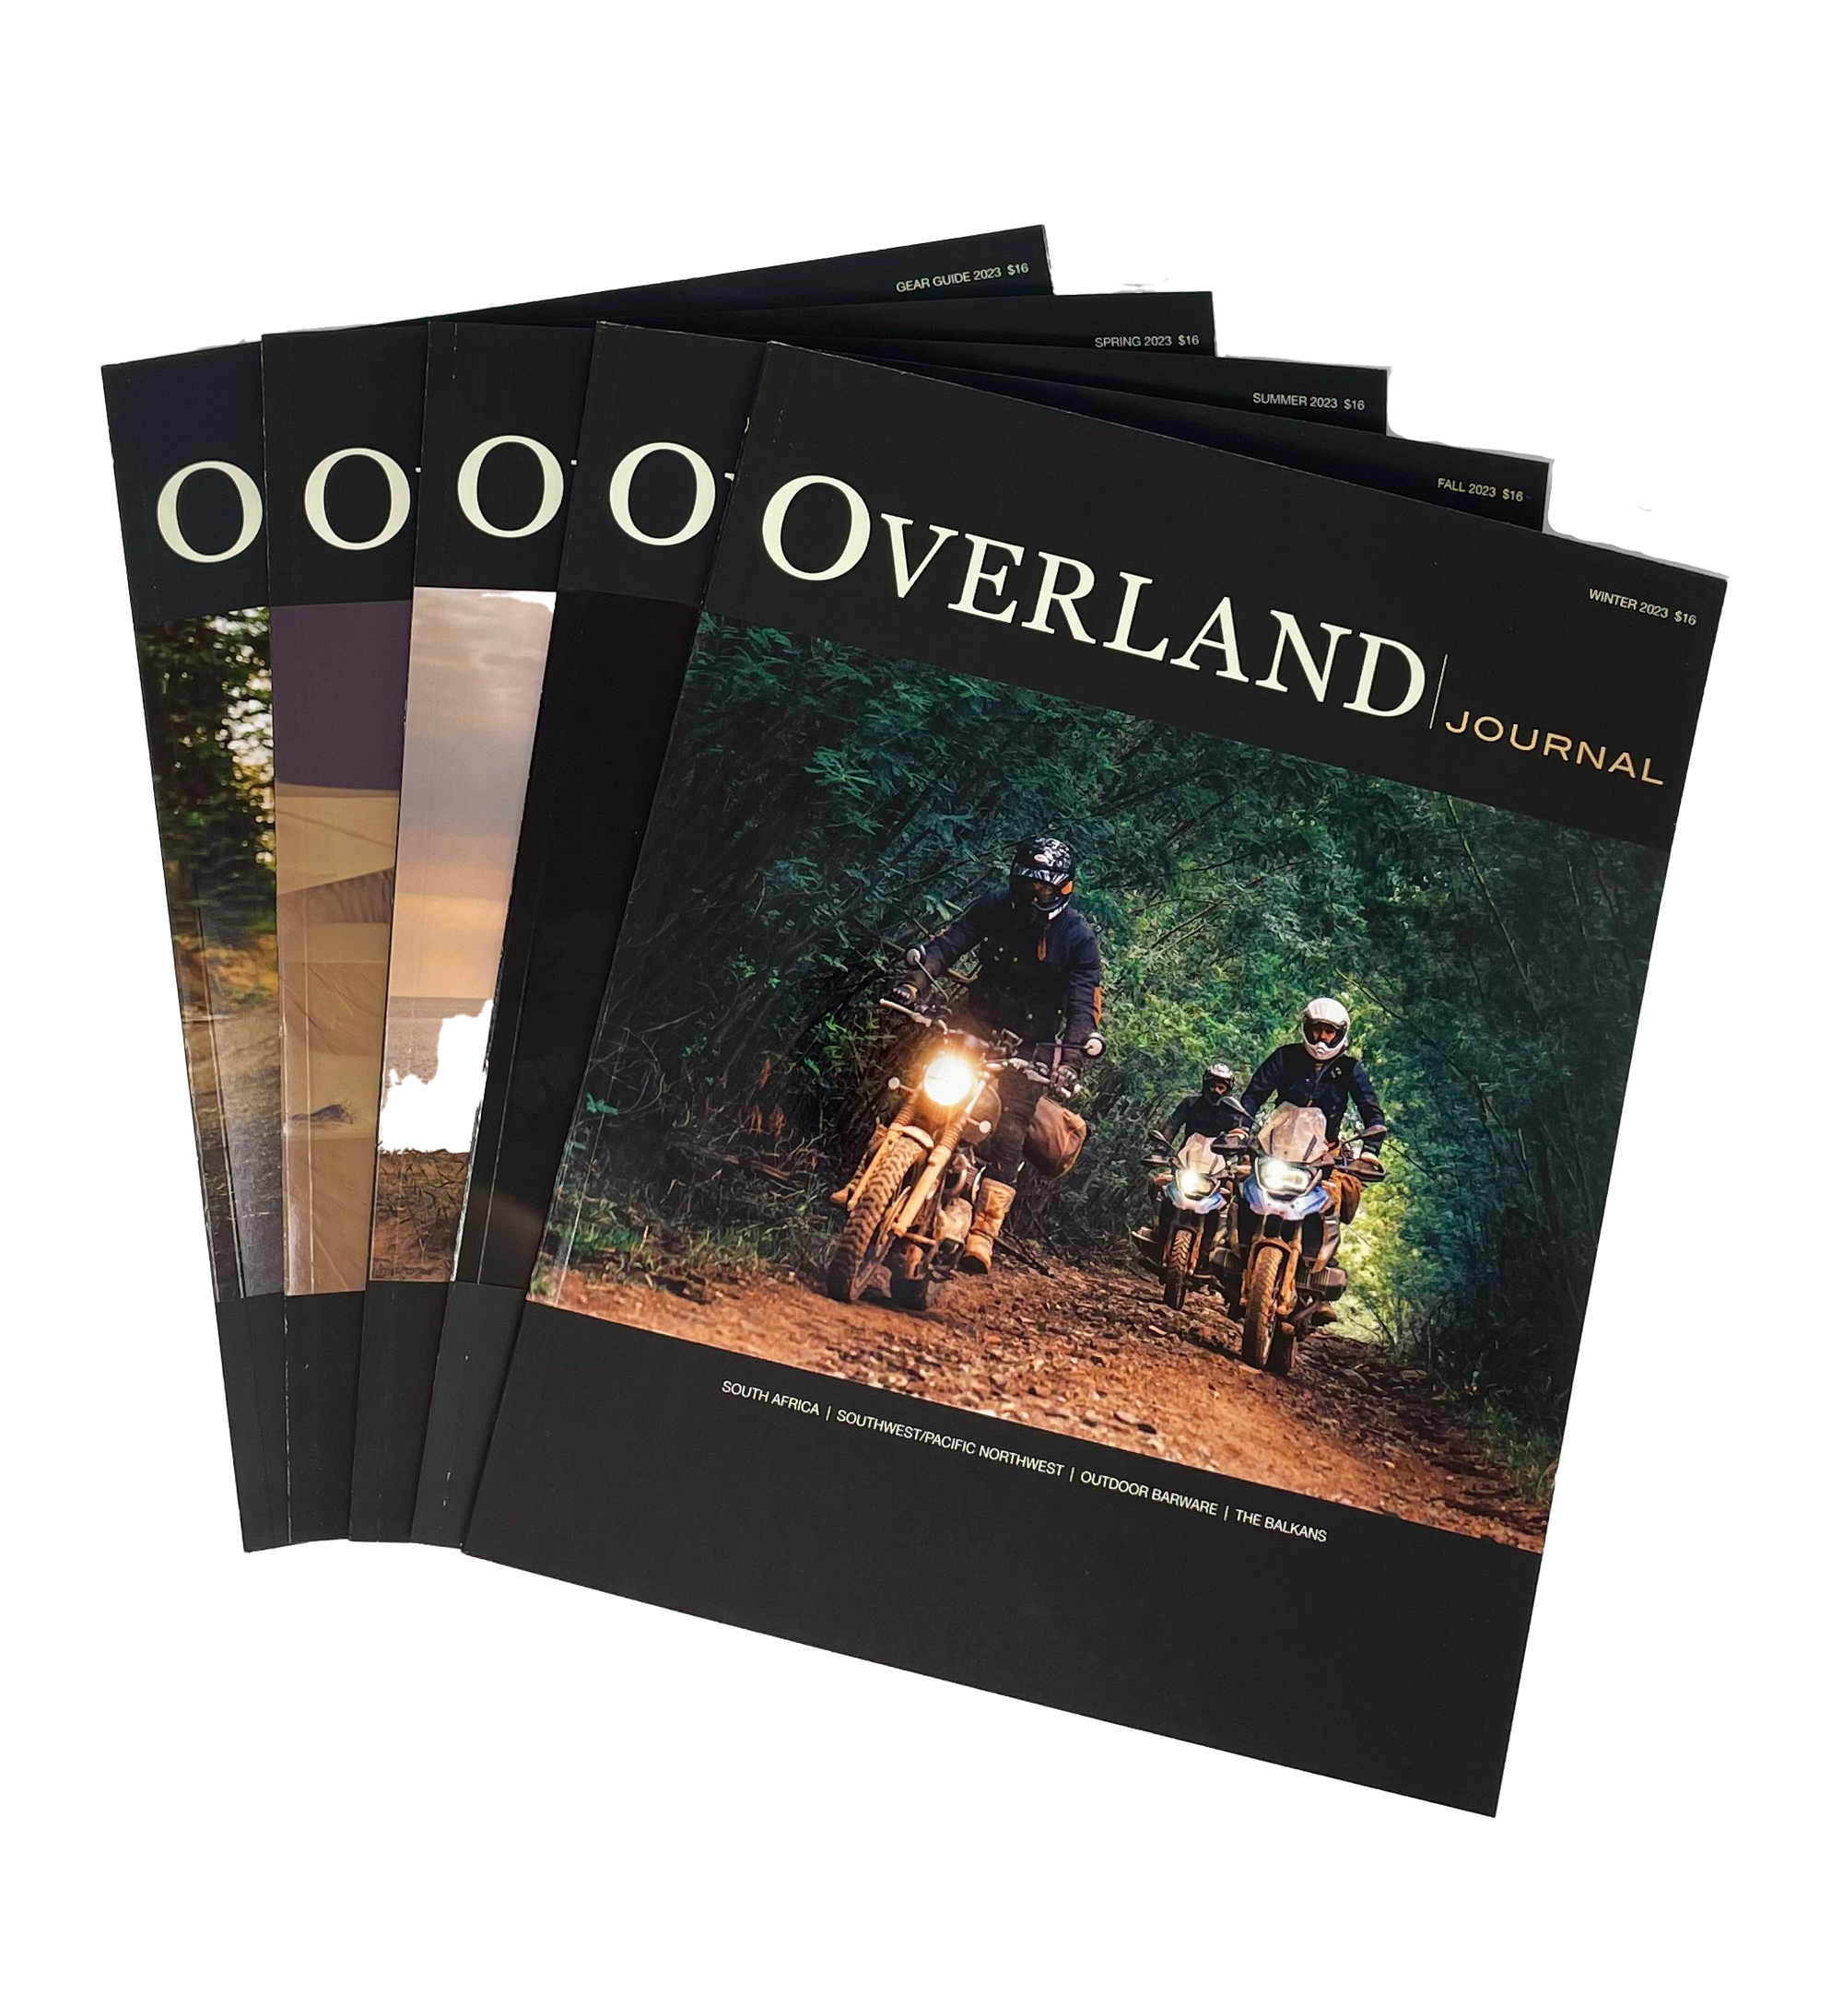 Subscribe to Overland Journal